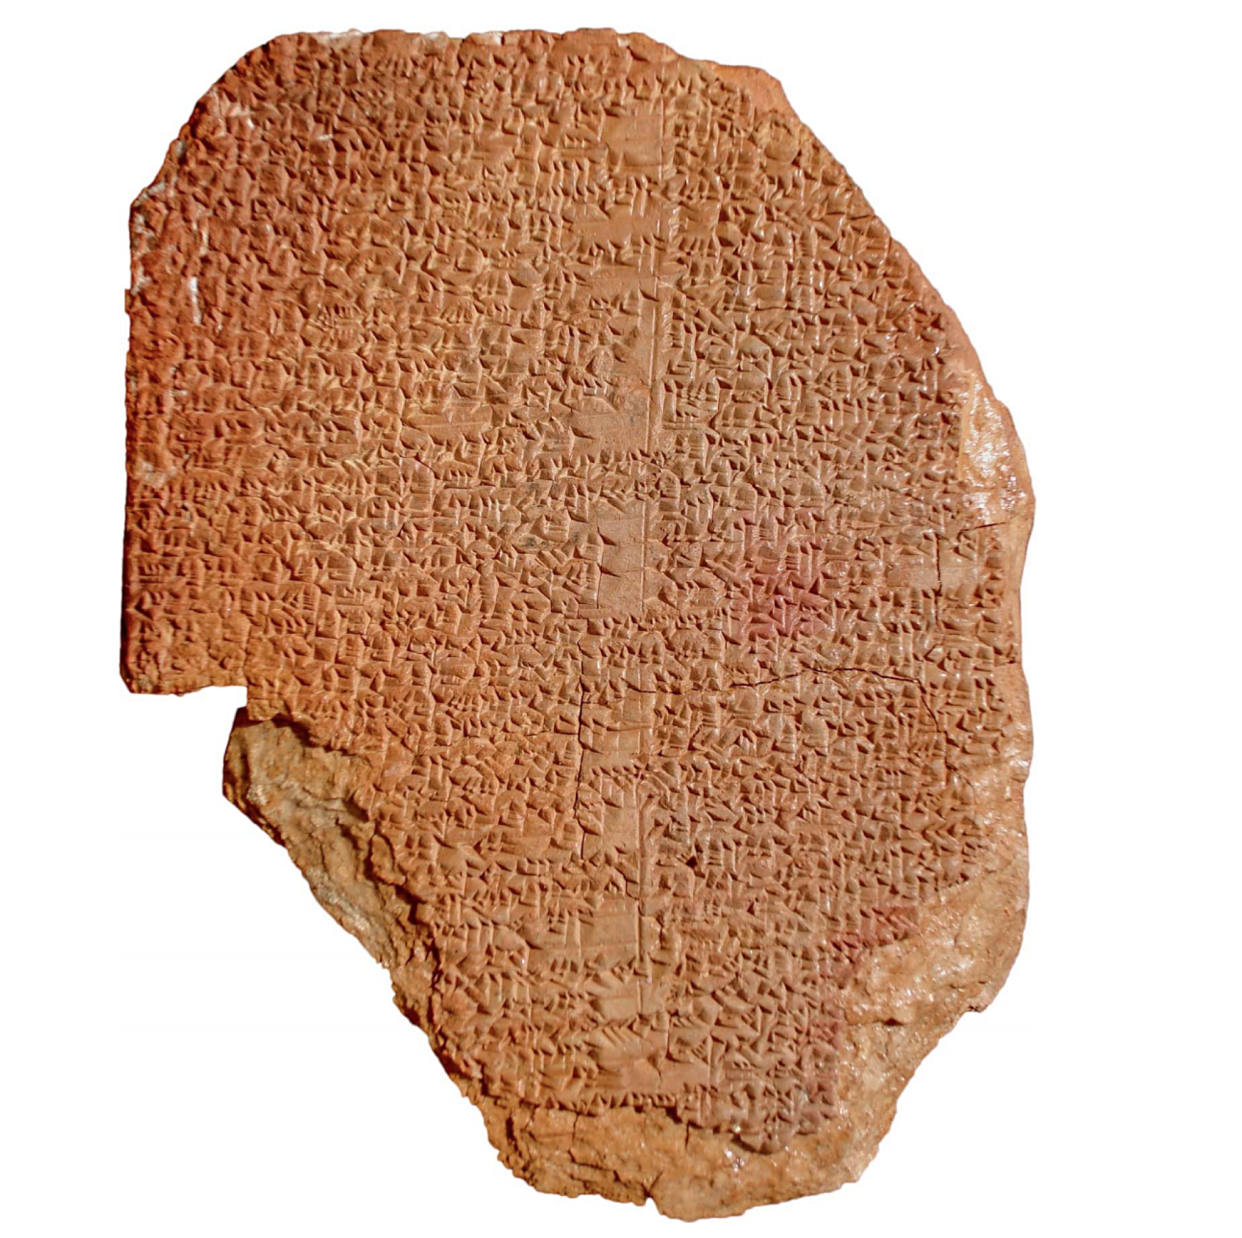 Cunieform tablet bearing part of the Epic of Gilgamesh (United States District Court for the Eastern District of New York)